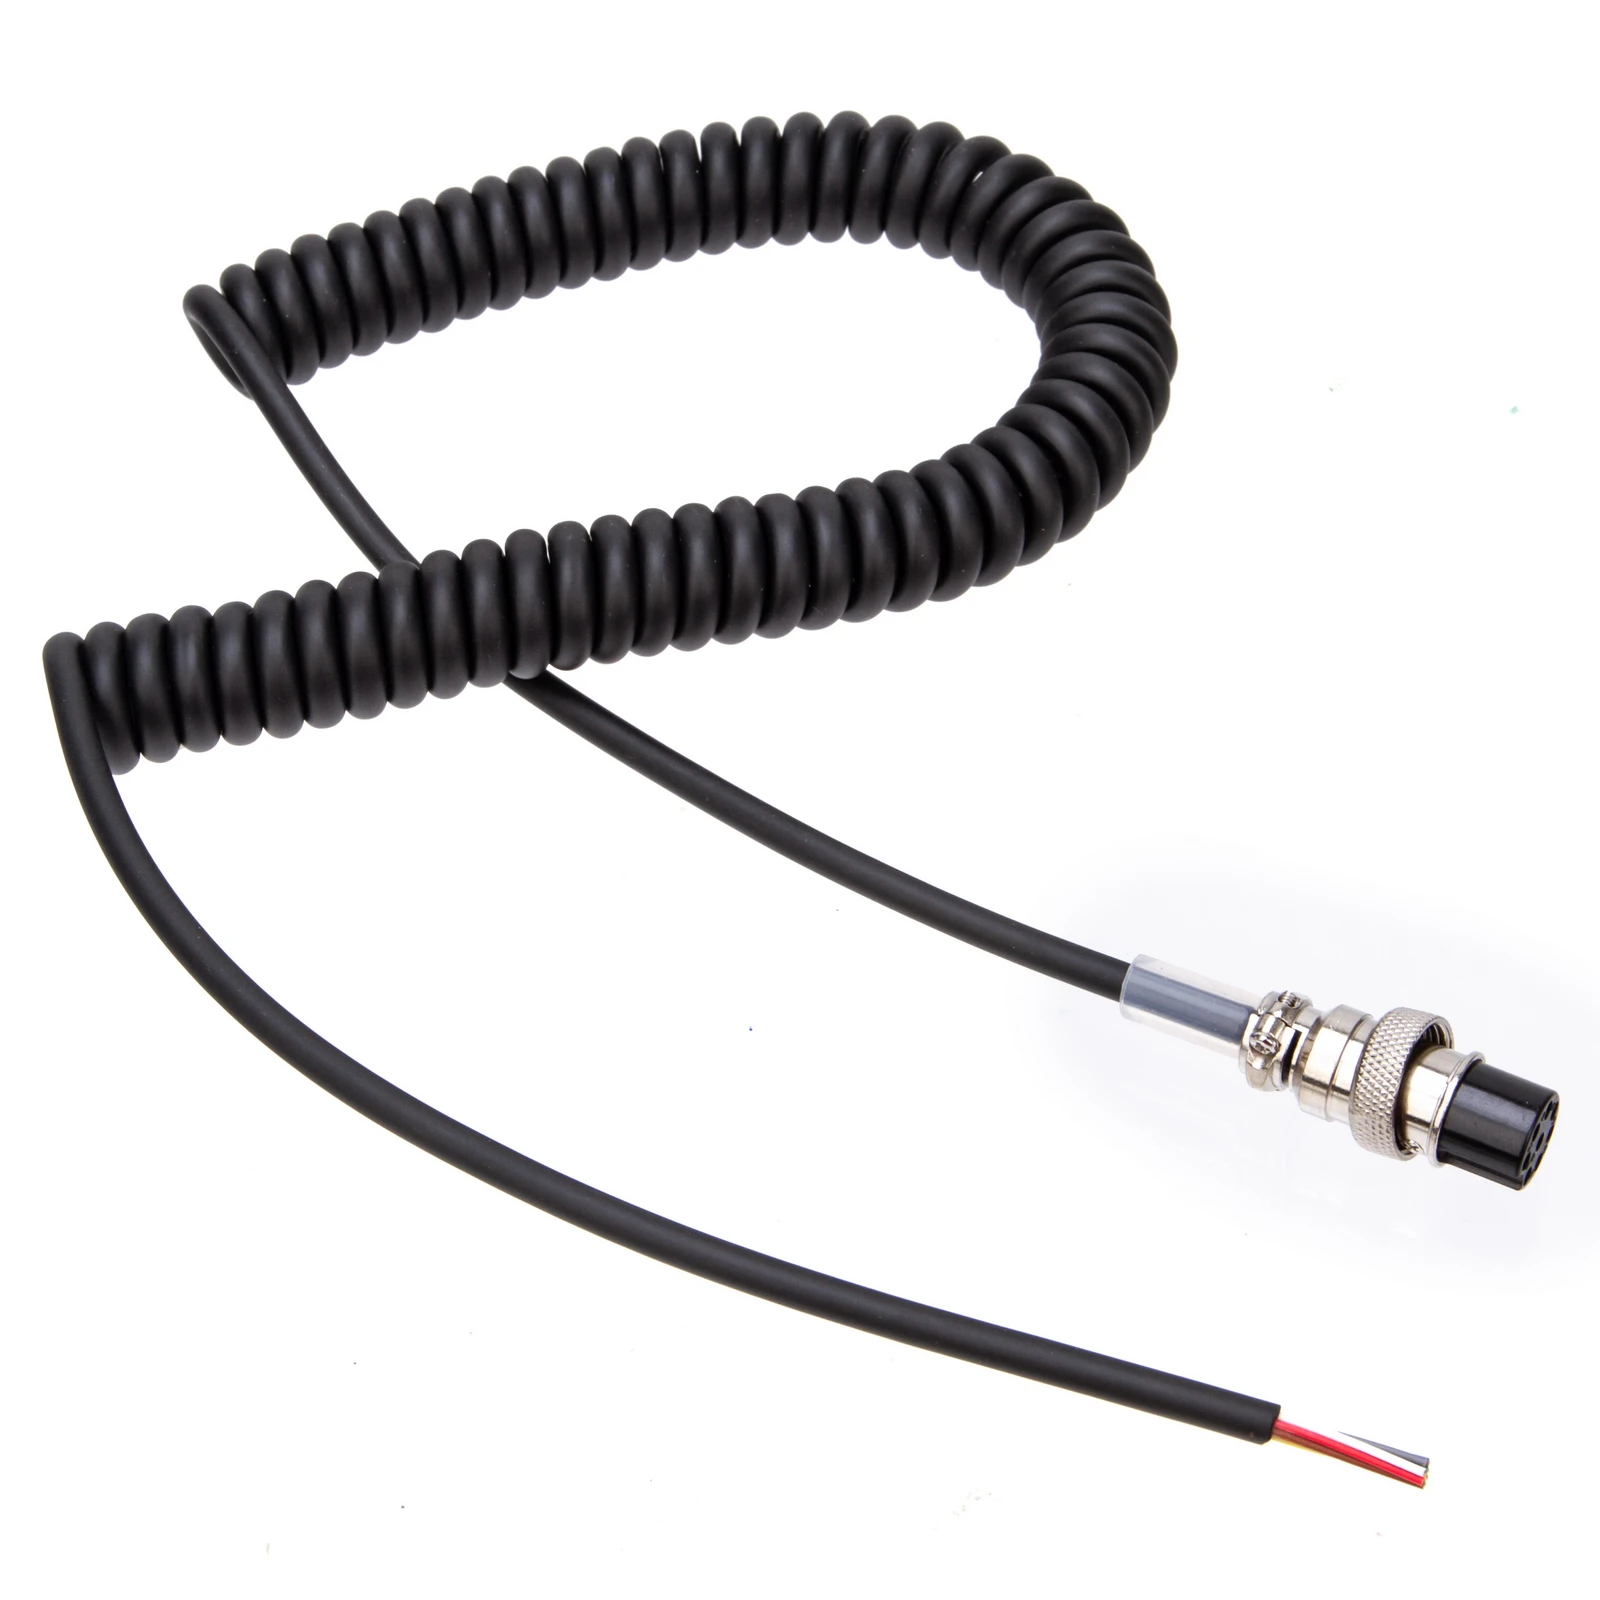 Handheld Ridao Speaker Mic Microphone PU Cable Cord For Alinco Radio EMS-57 EMS-53 DR635 DR620 DR435 Walkie Talkie